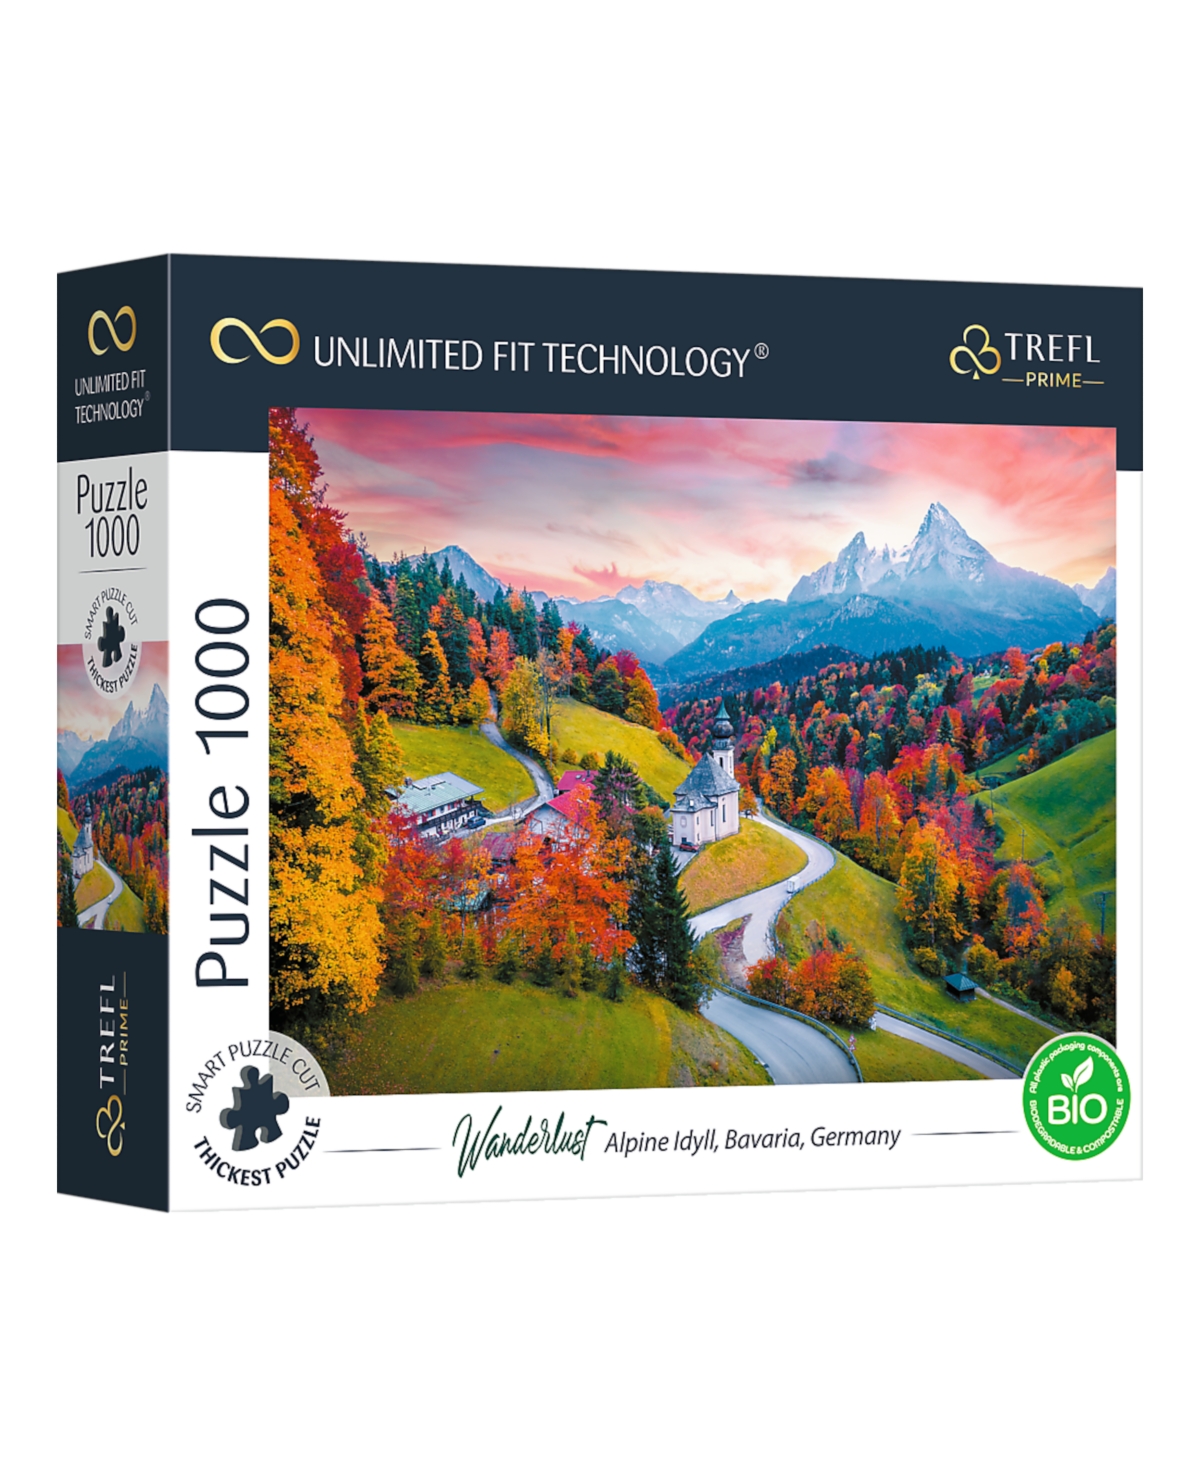 Trefl Prime 1000 Piece Puzzle- Wanderlust At The Foot Of Alps, Bavaria, Germany In Multi